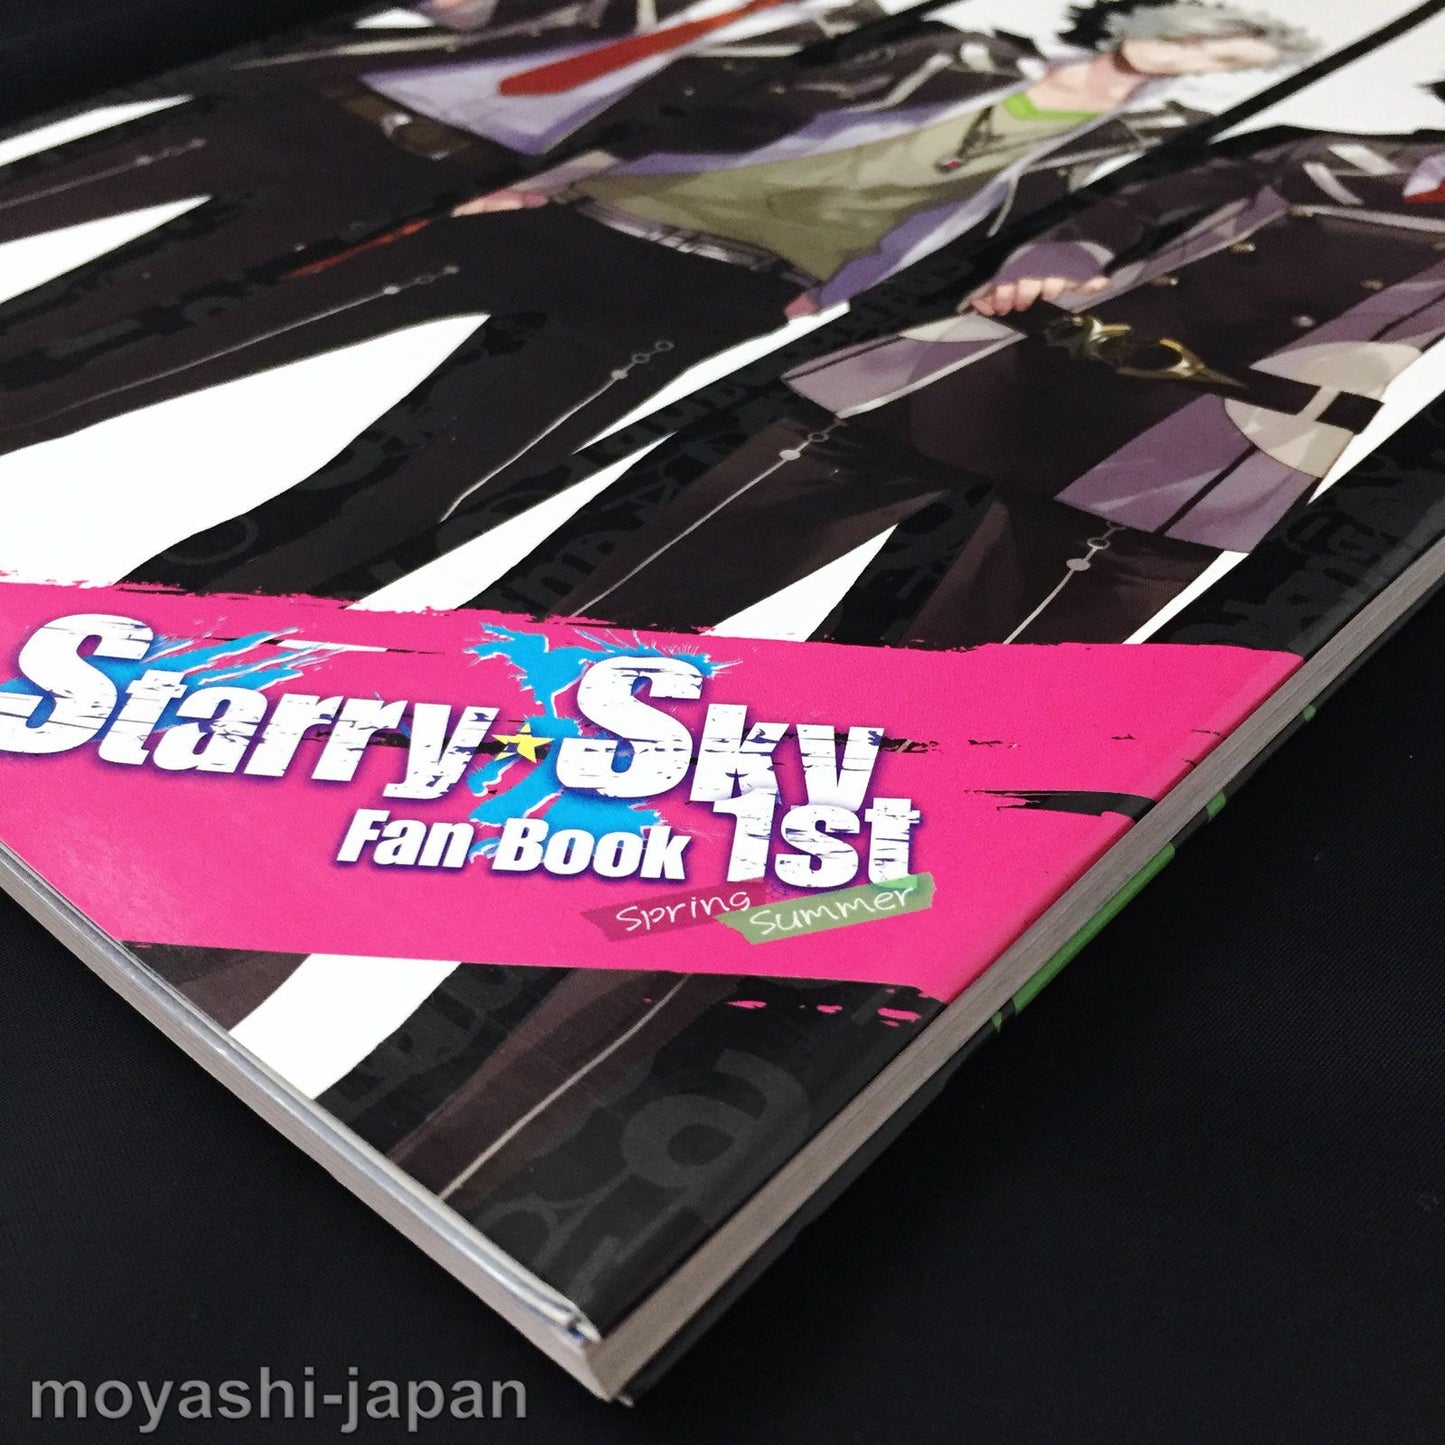 Starry Sky Fan Book 1st Spring & Summer animate limited